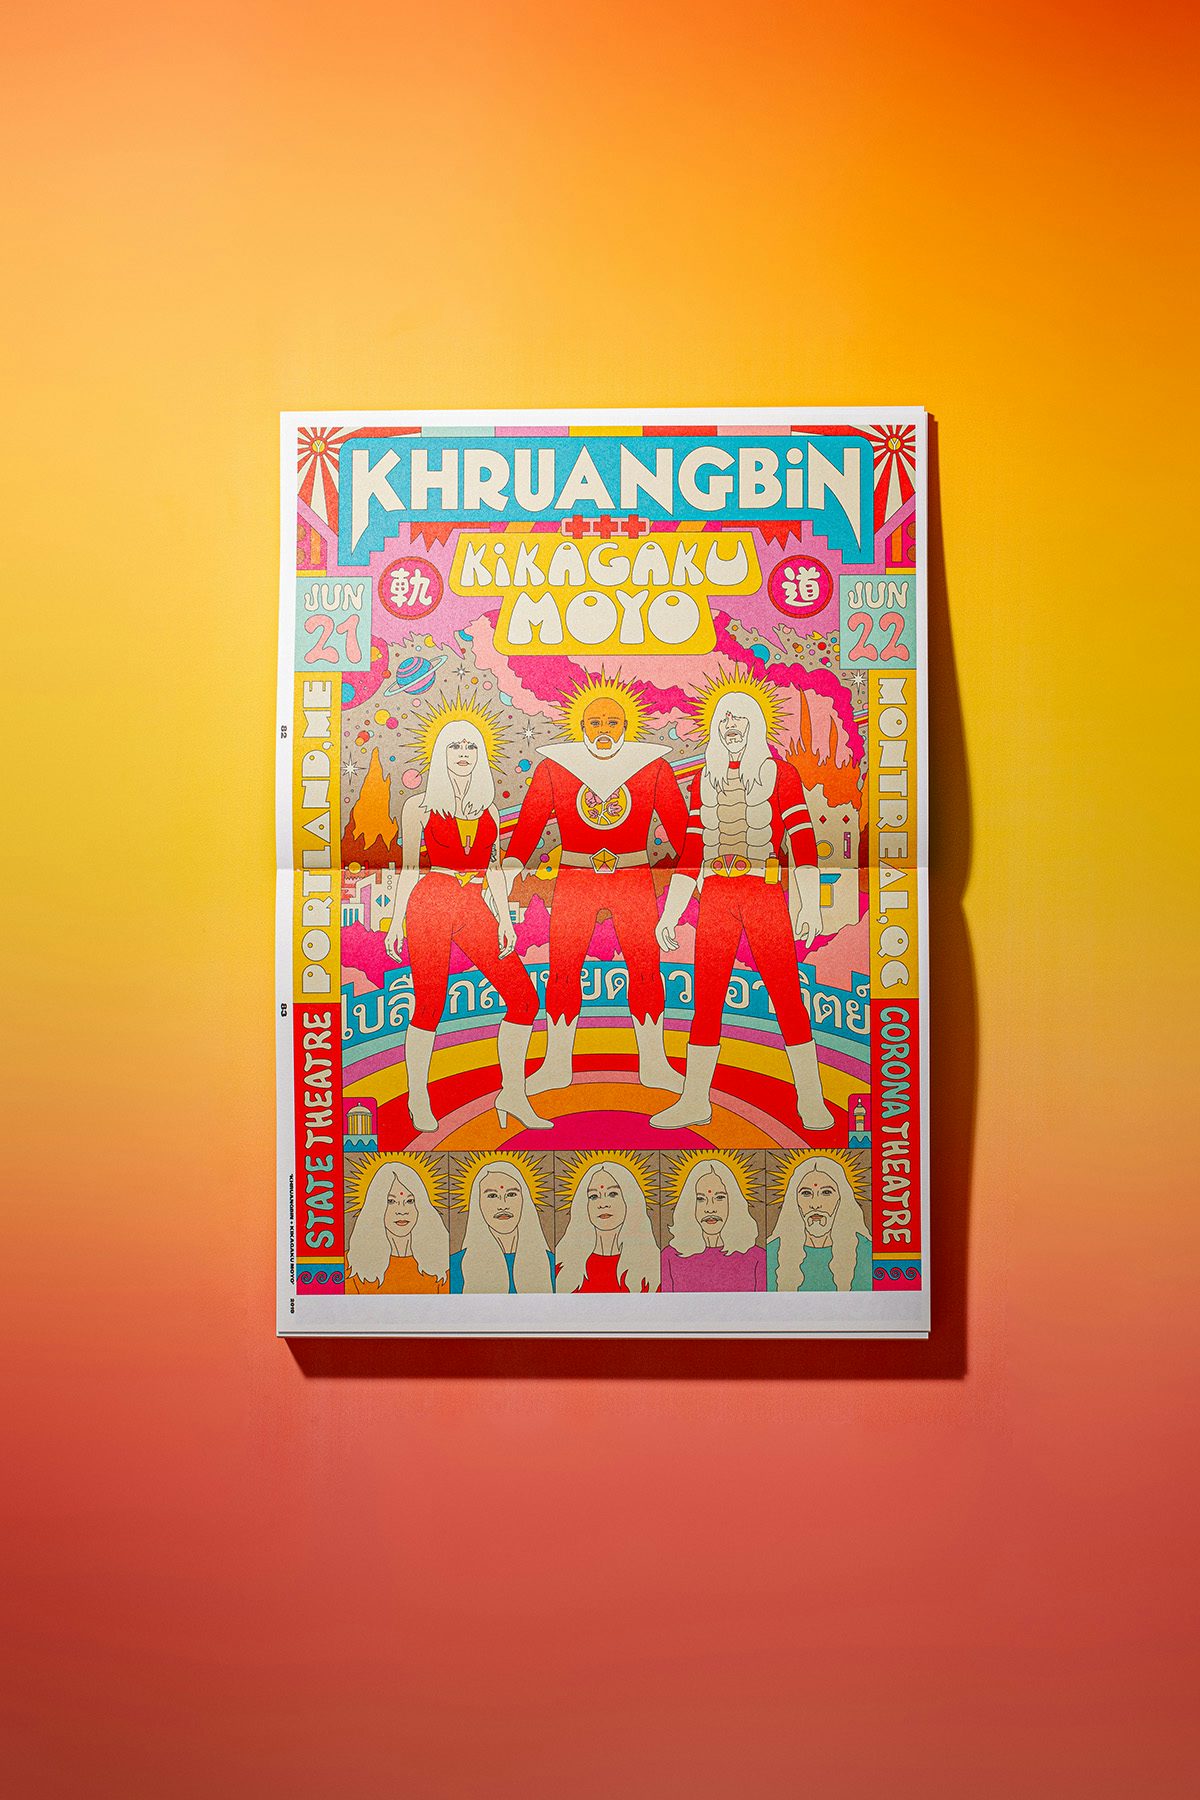 Photograph of a spread in Ardneks' book Coastalvision showing a brightly coloured illustration with three central figures headlined Khruangbin